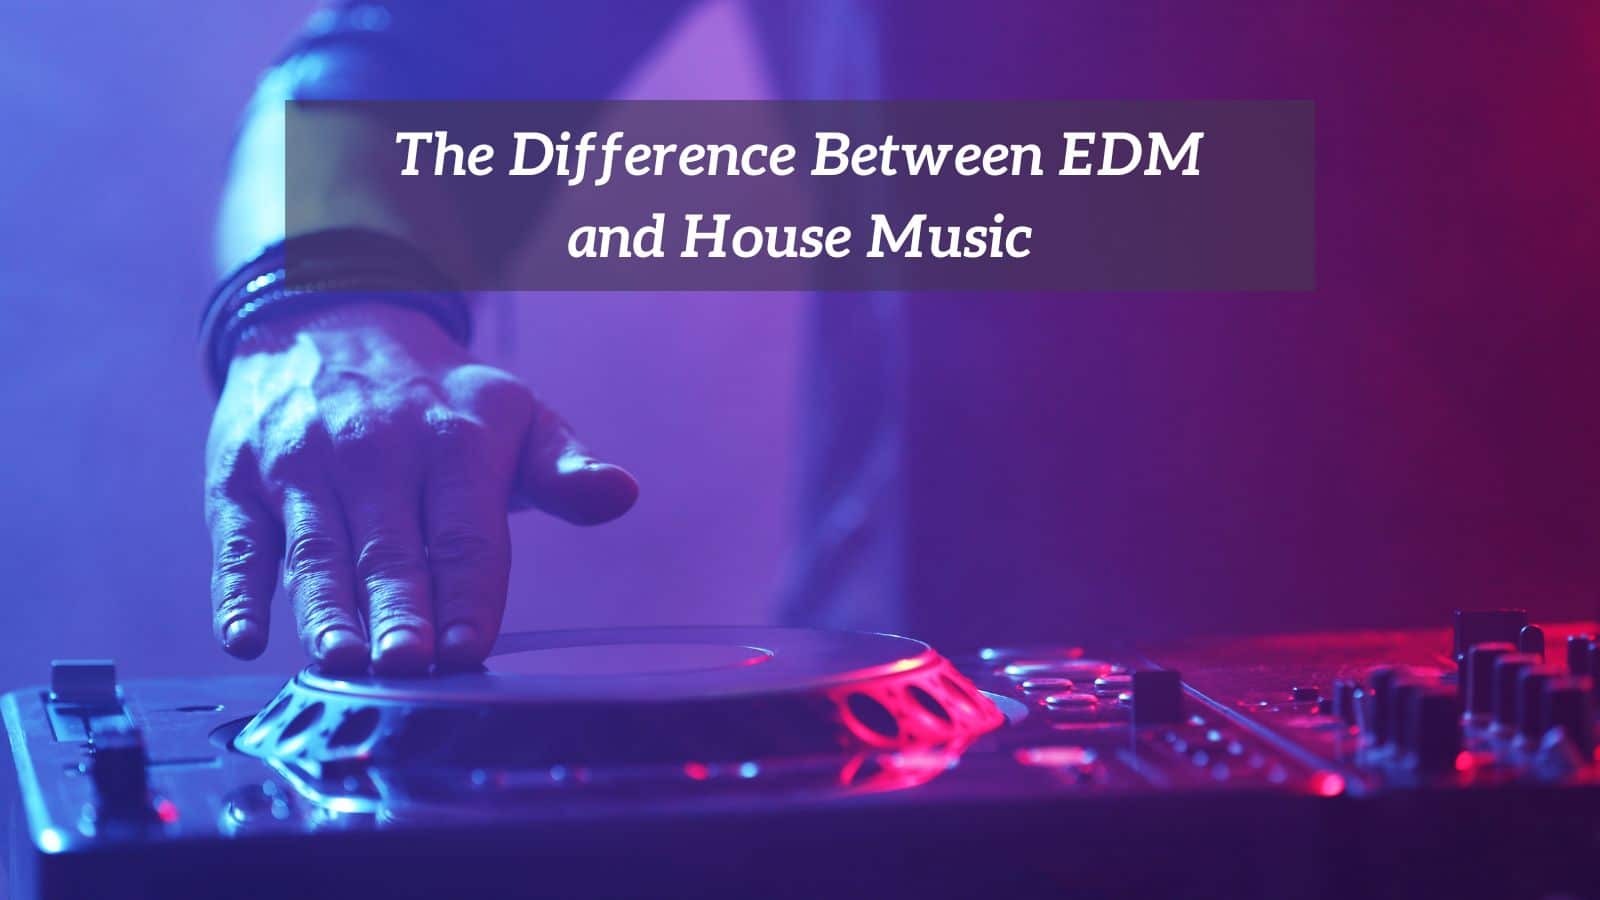 The Difference Between EDM and House Music